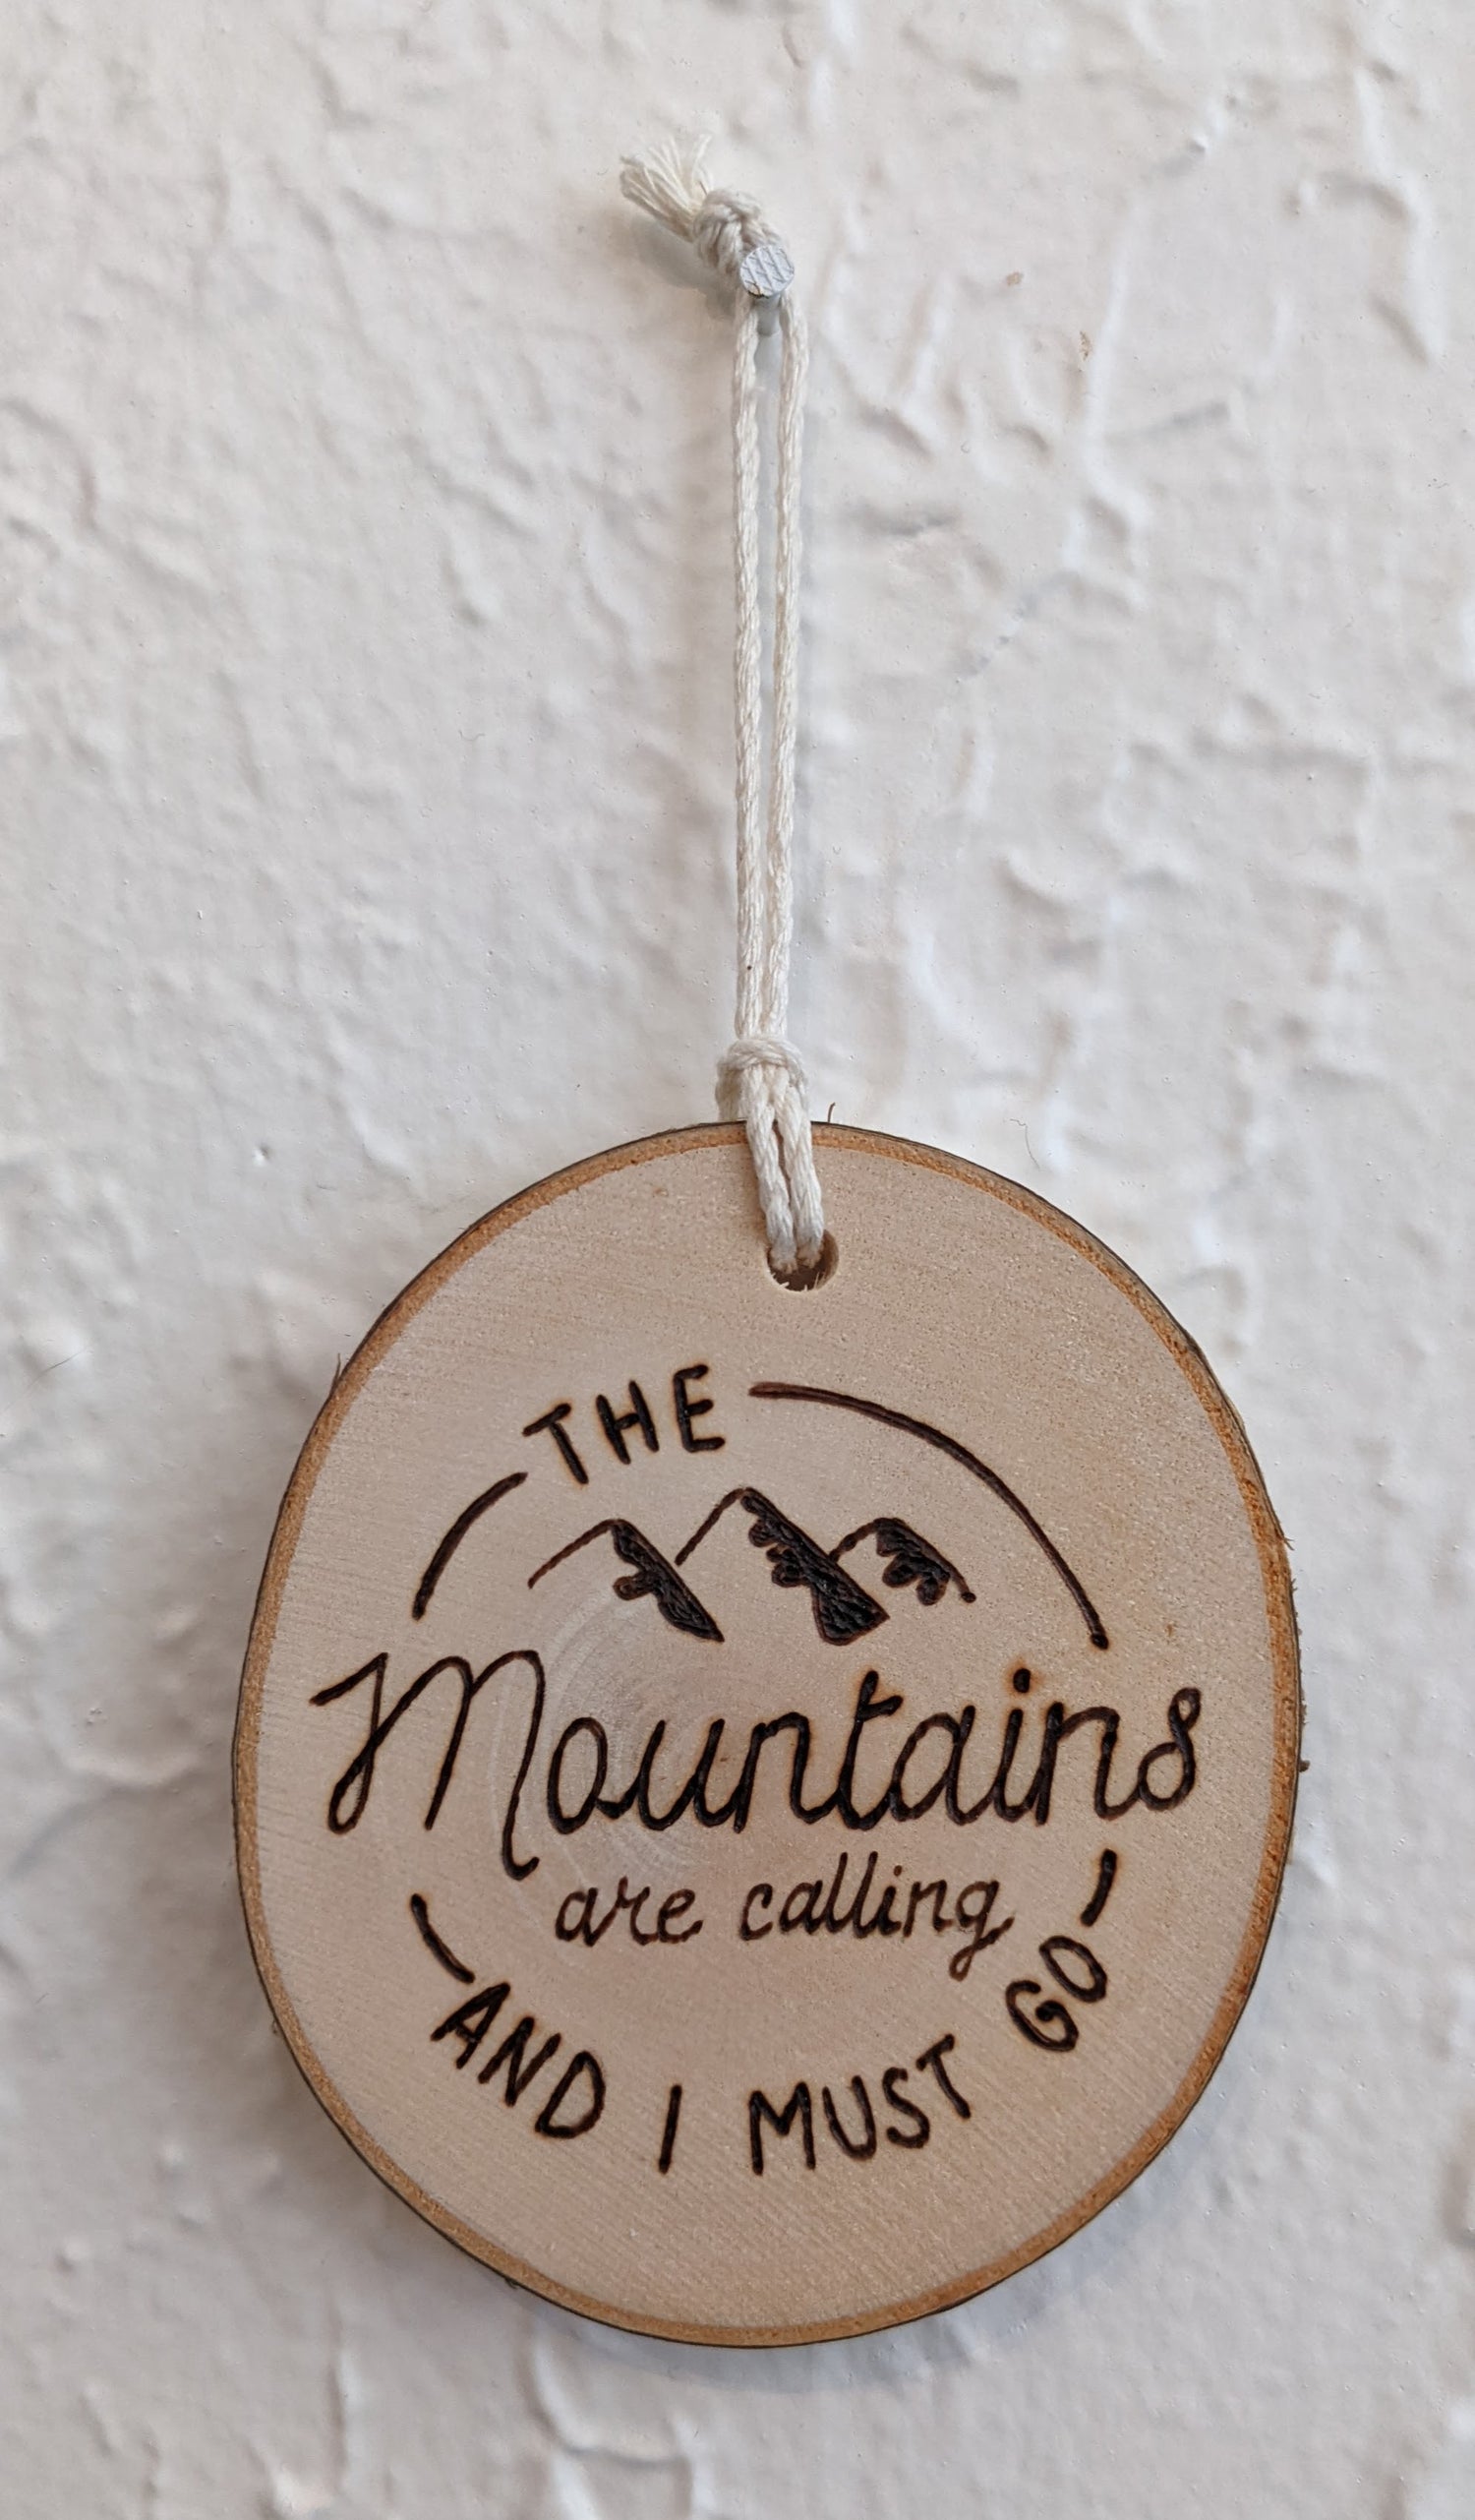 Wood burned Art by Wood Wanderlust - the mountains are calling and I must go, text art on ornament